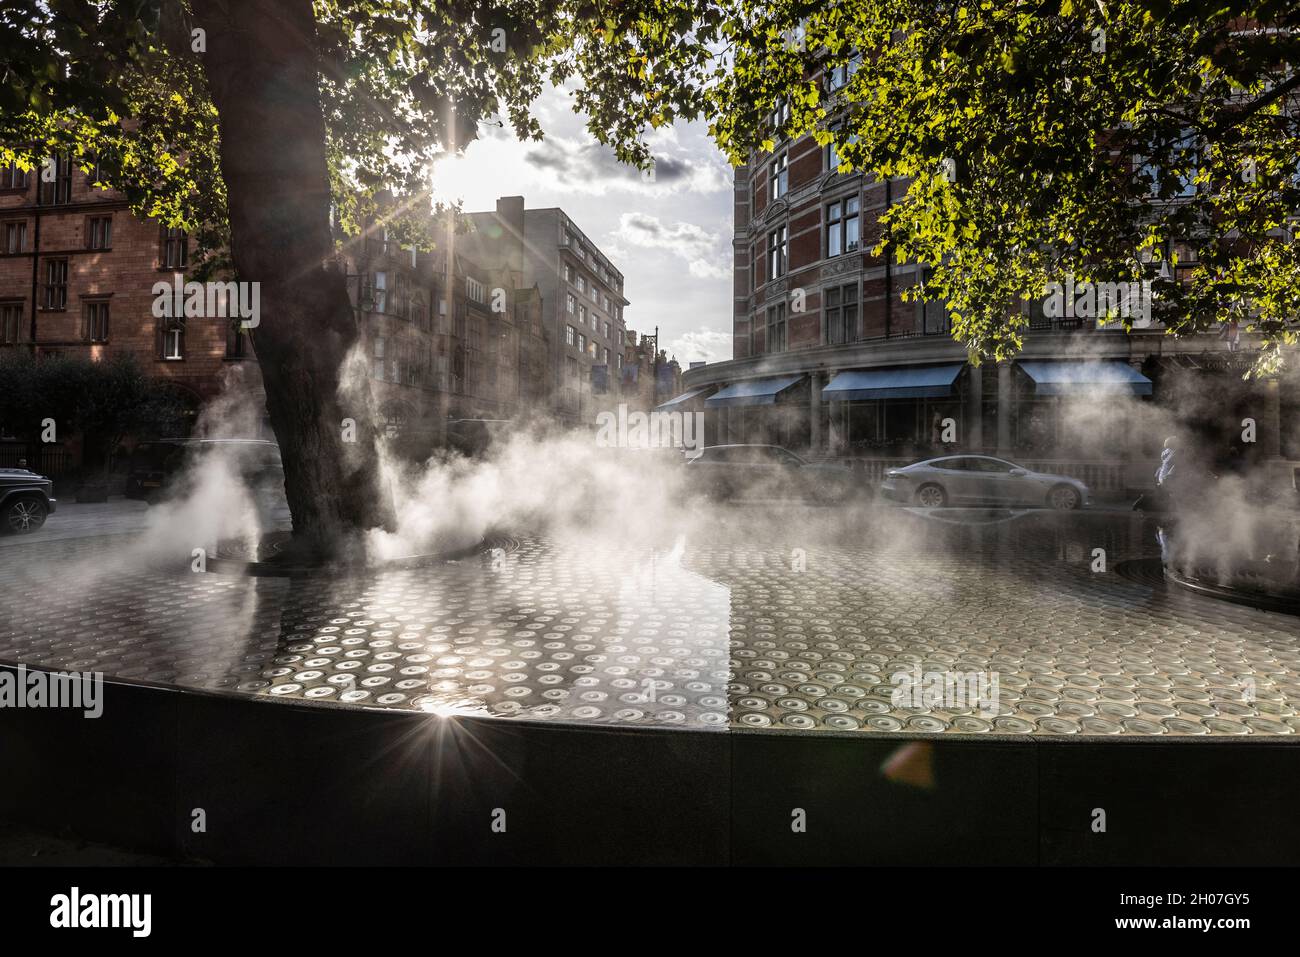 Artificial mist rises in a water feature outside the Connaught Hotel in London's chic Mayfair area, London, England, United Kingdom Stock Photo